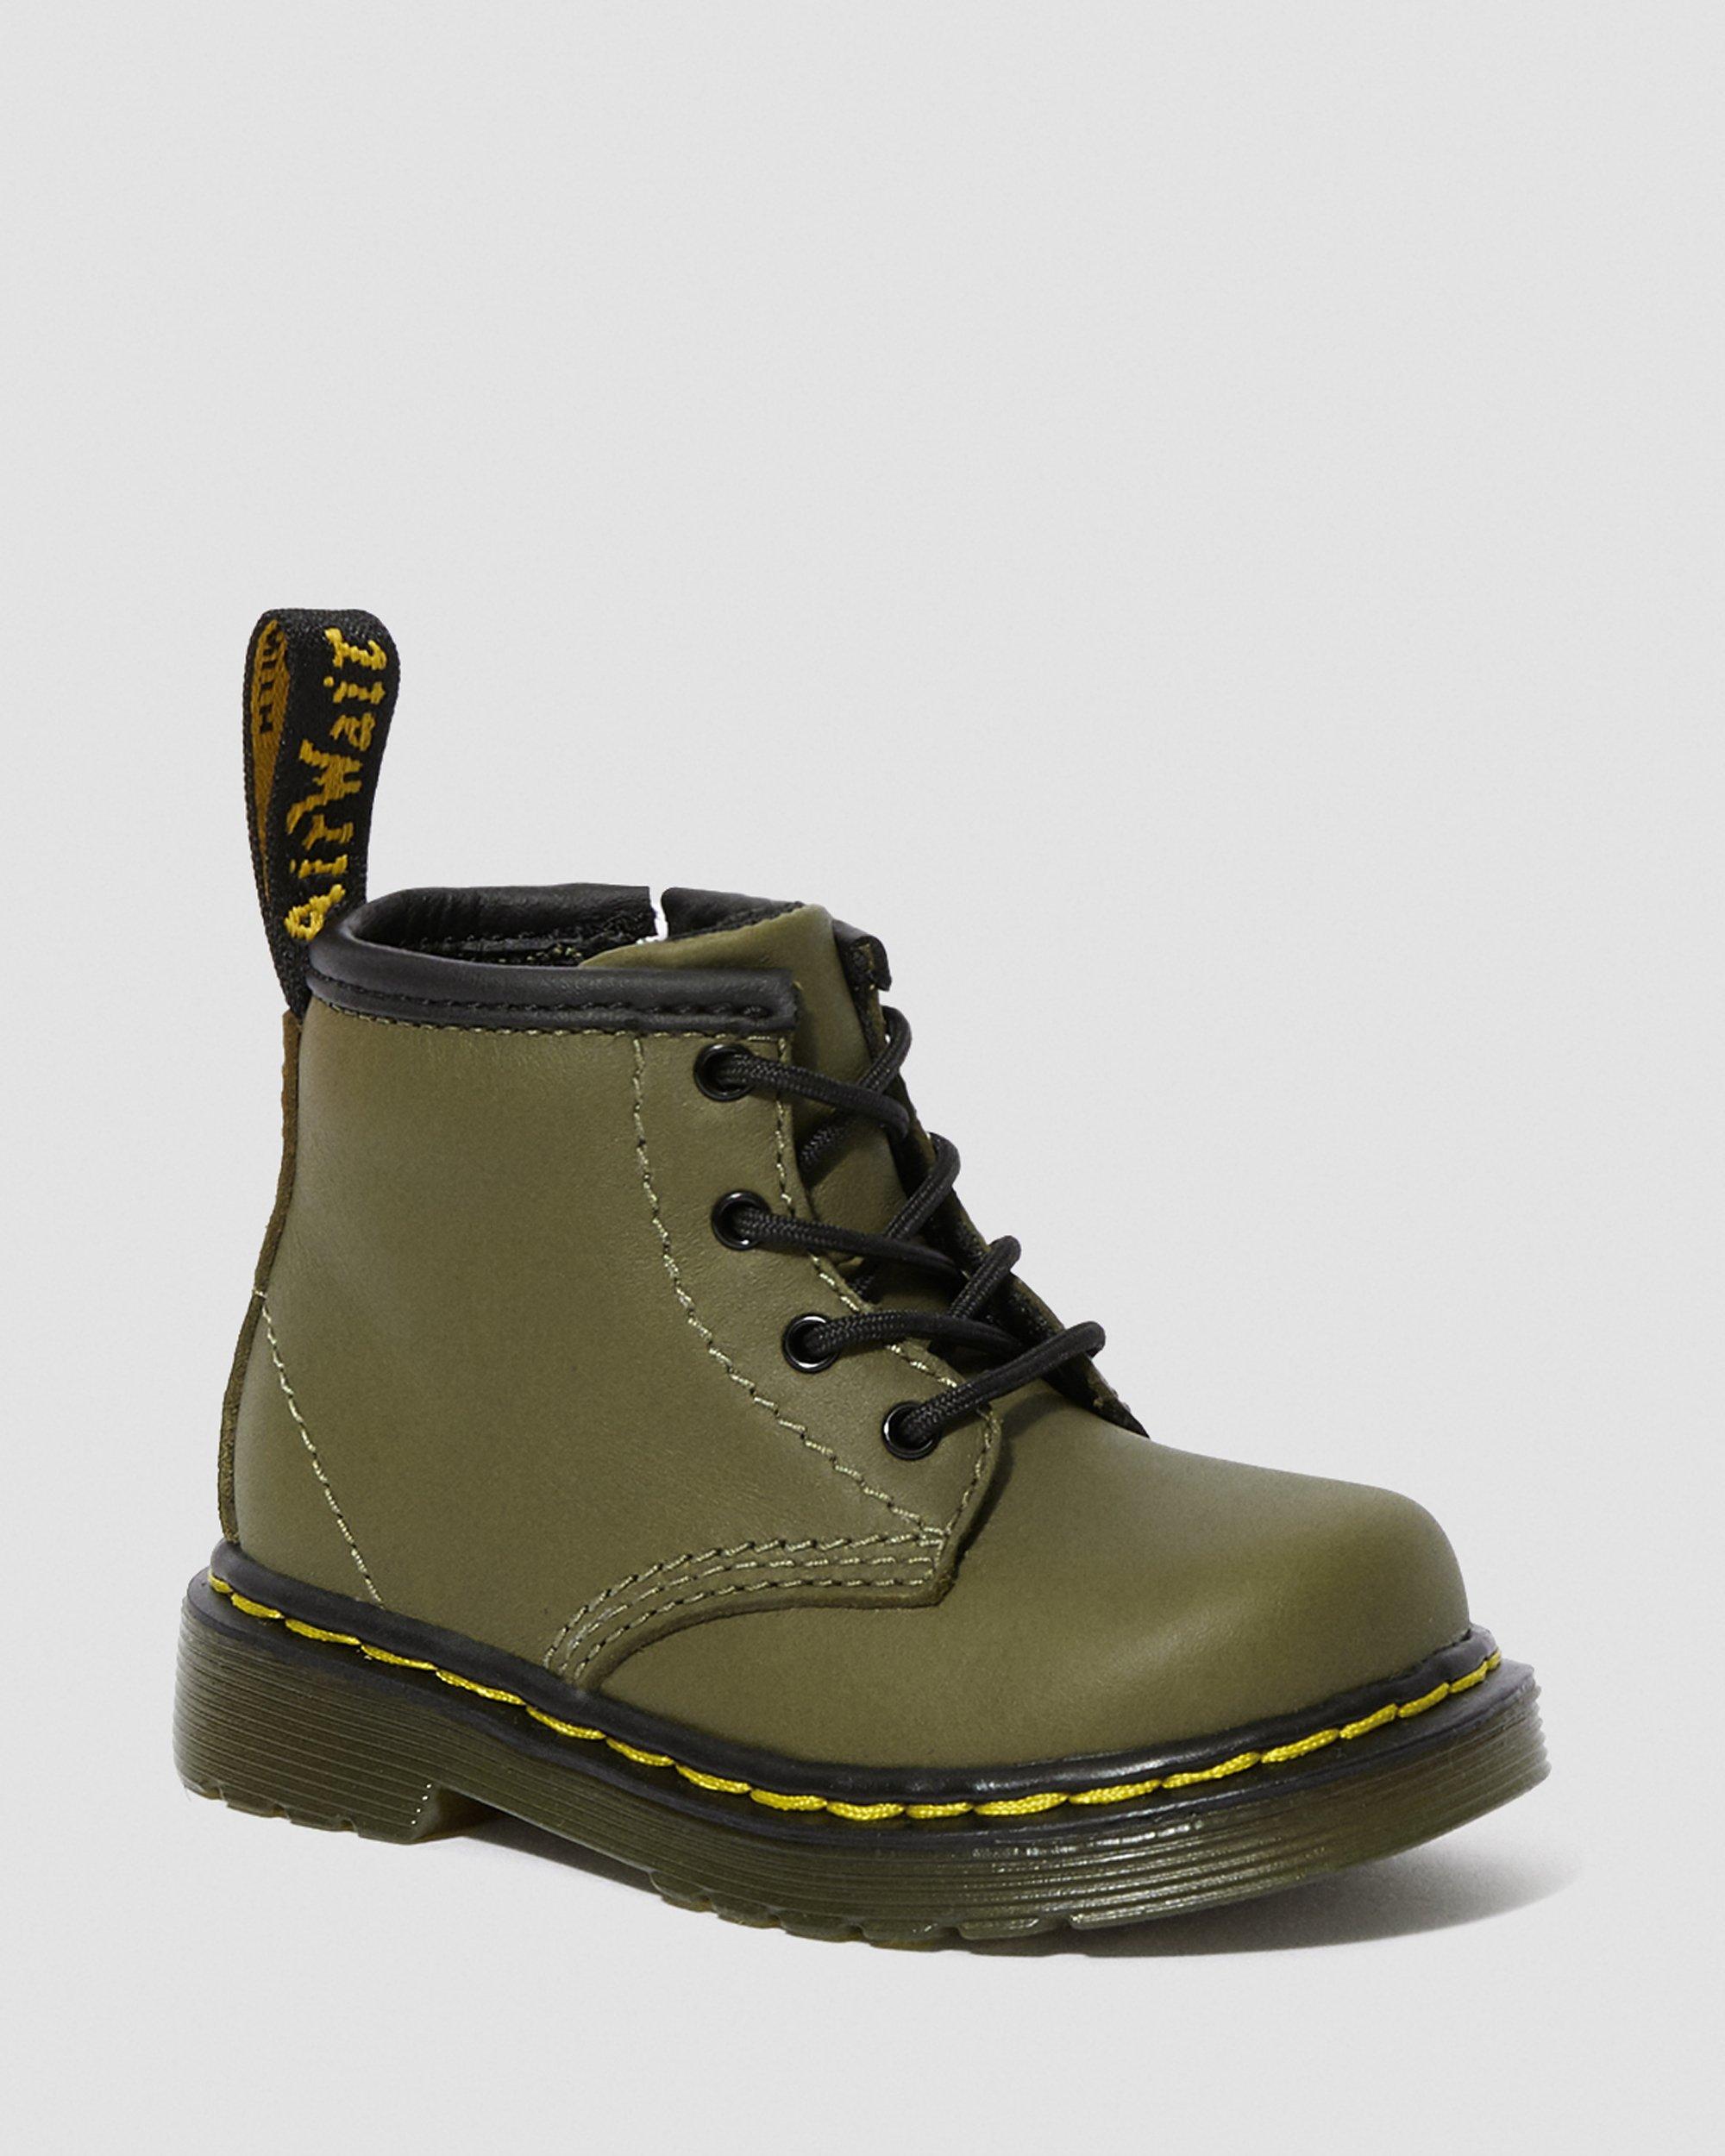 Aanwezigheid Perceptie Uitrusting Infant 1460 Leather Lace Up Boots | Dr. Martens